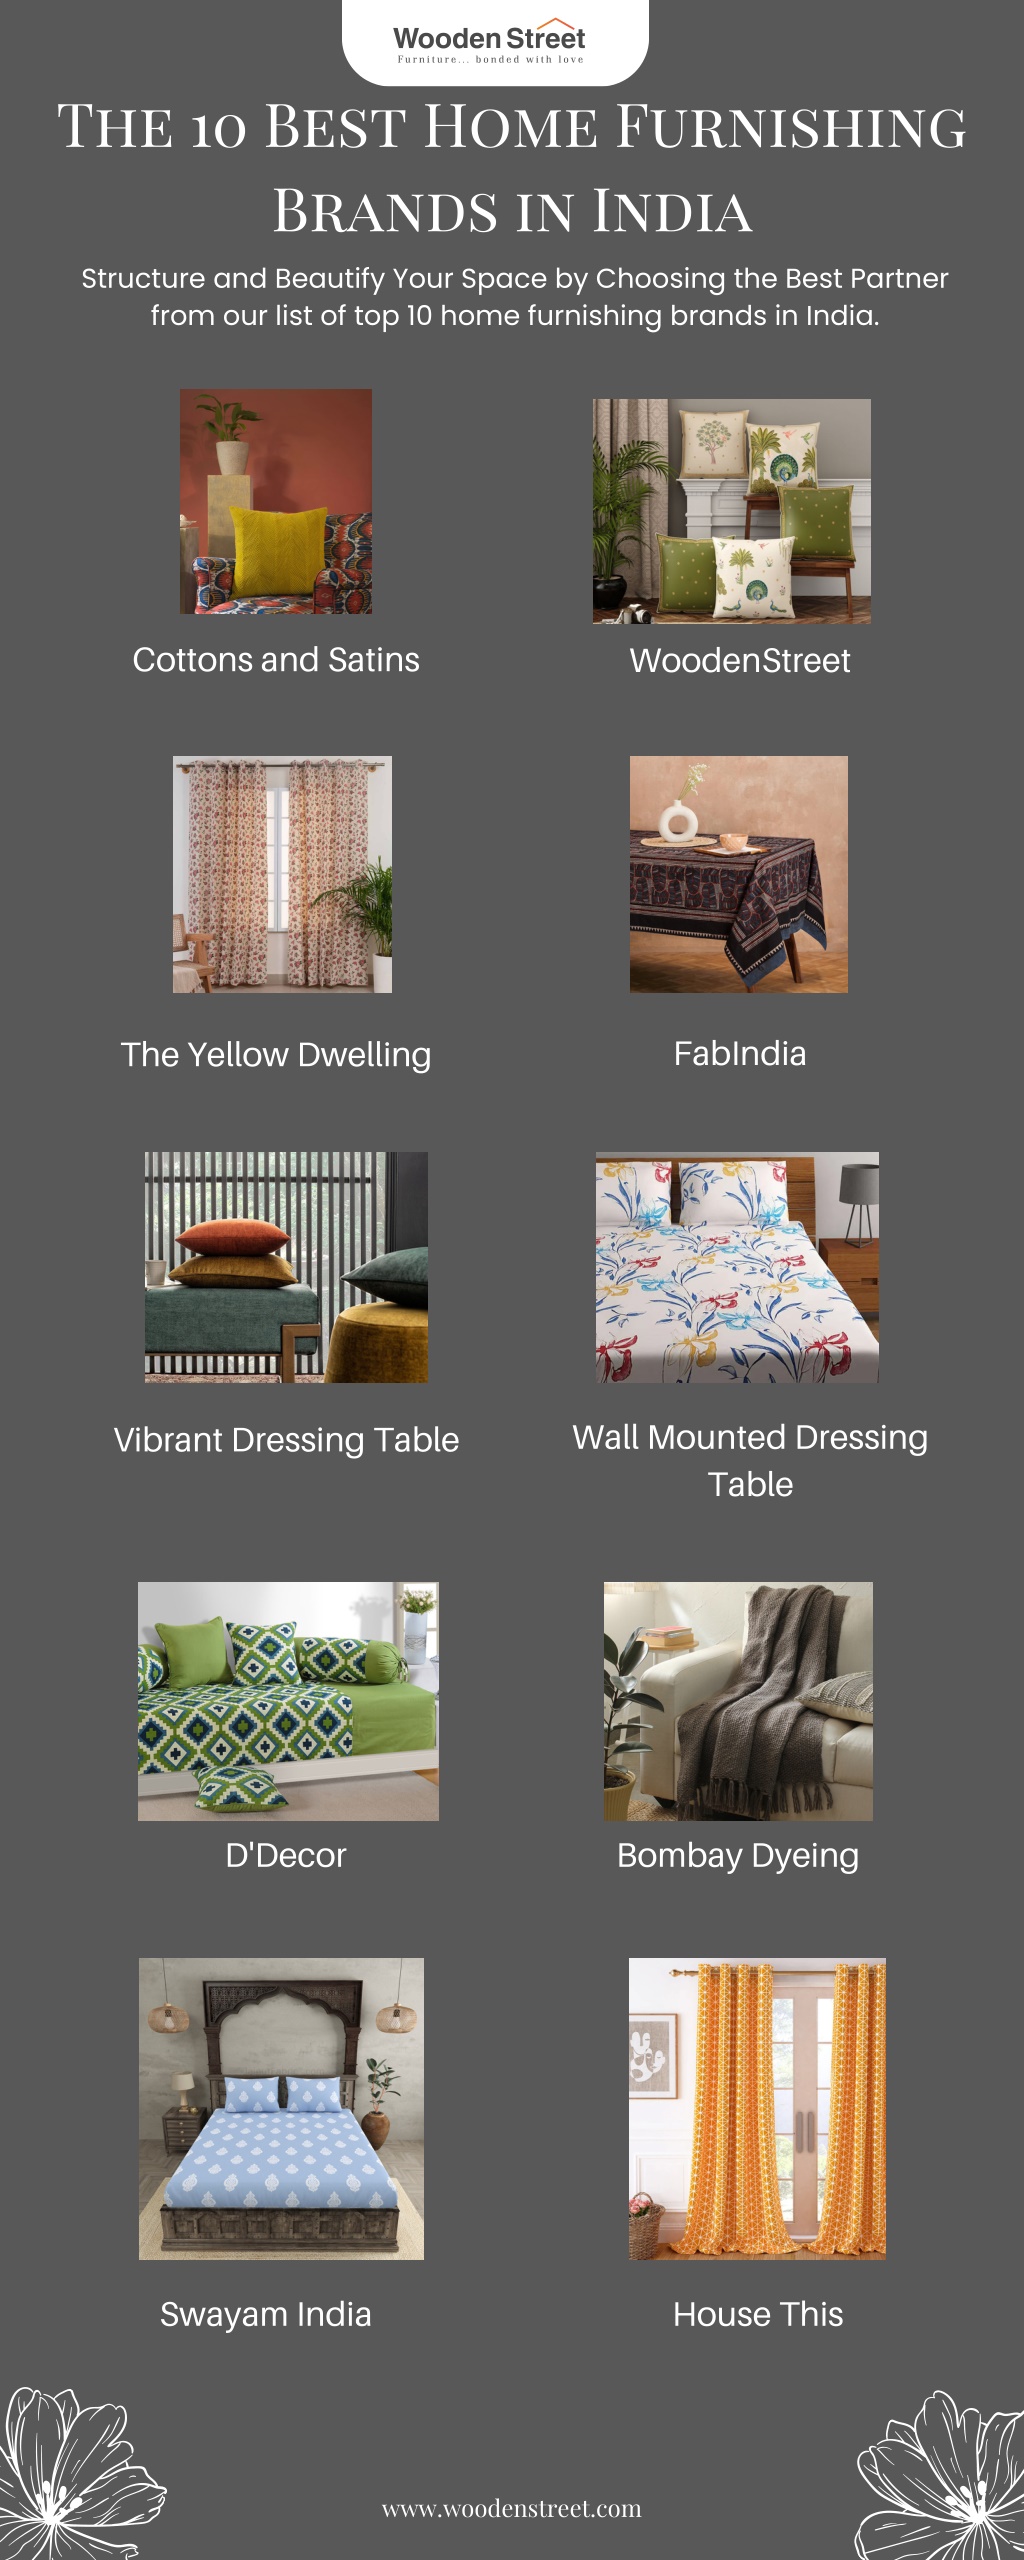 Ppt The 10 Best Home Furnishing Brands In India Powerpoint Presentation Id 12317301